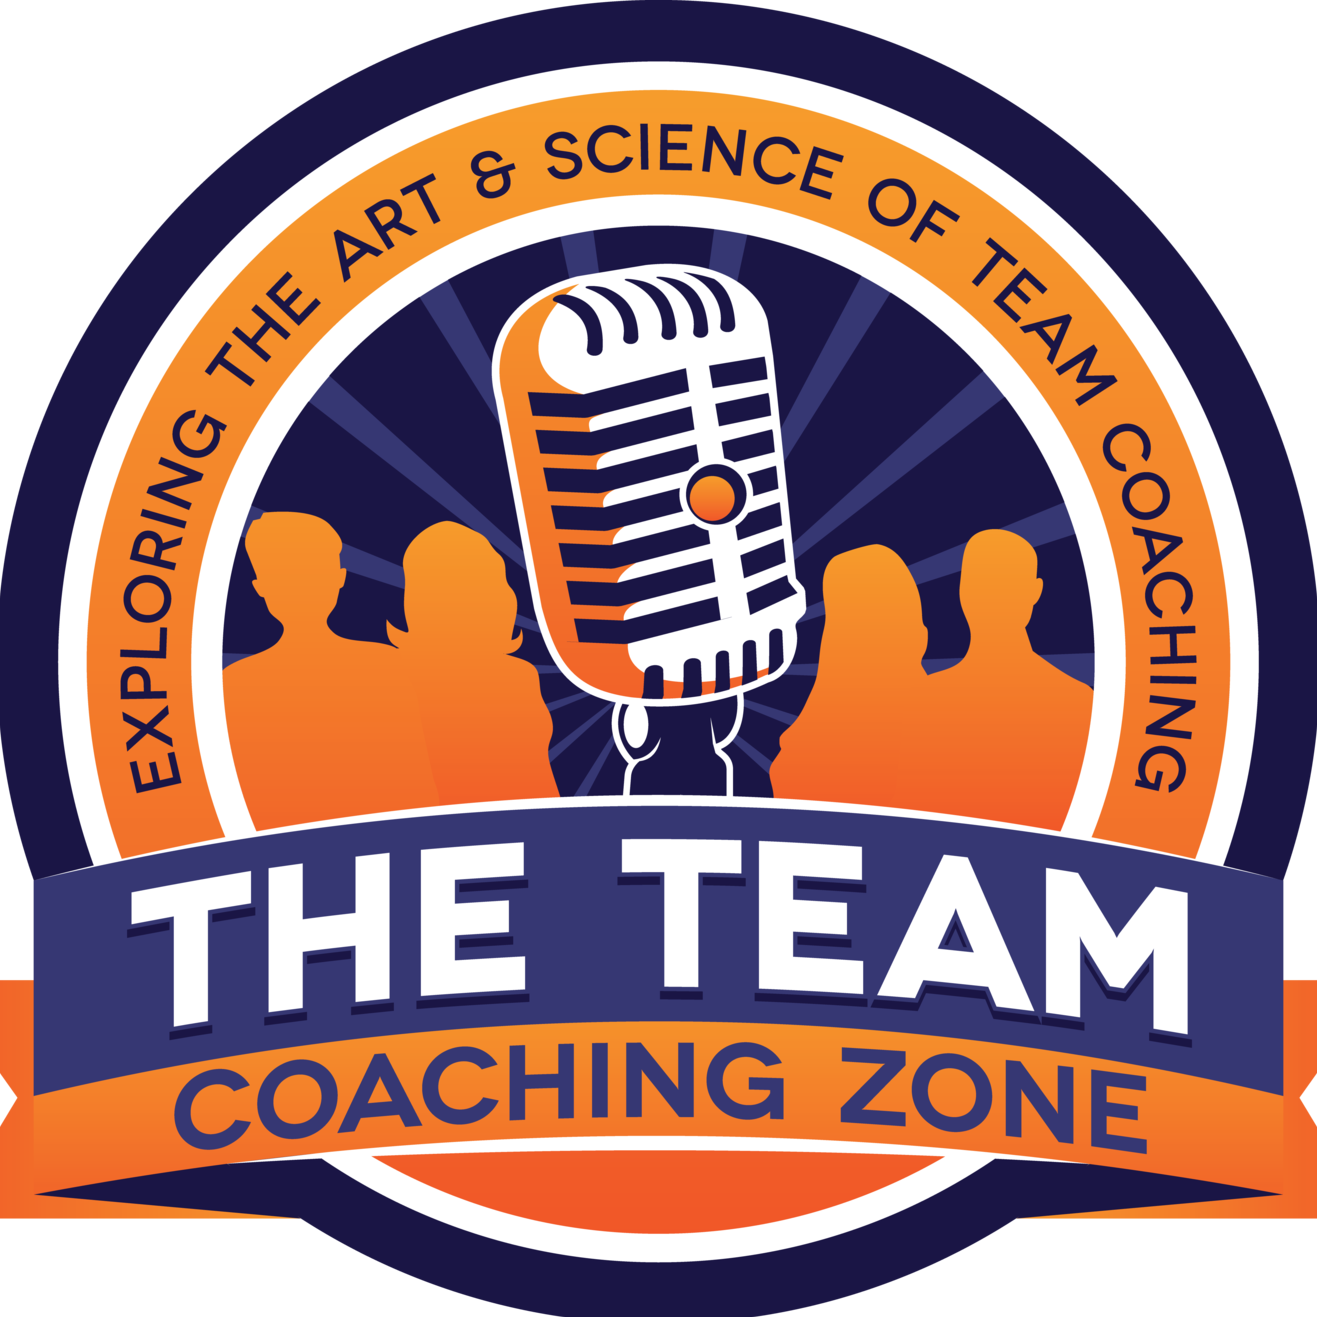 Explore the art & science of #teamcoaching with #podcasts, #webinars, blogs & community. #BusinessCoach #Coaching #Leadership